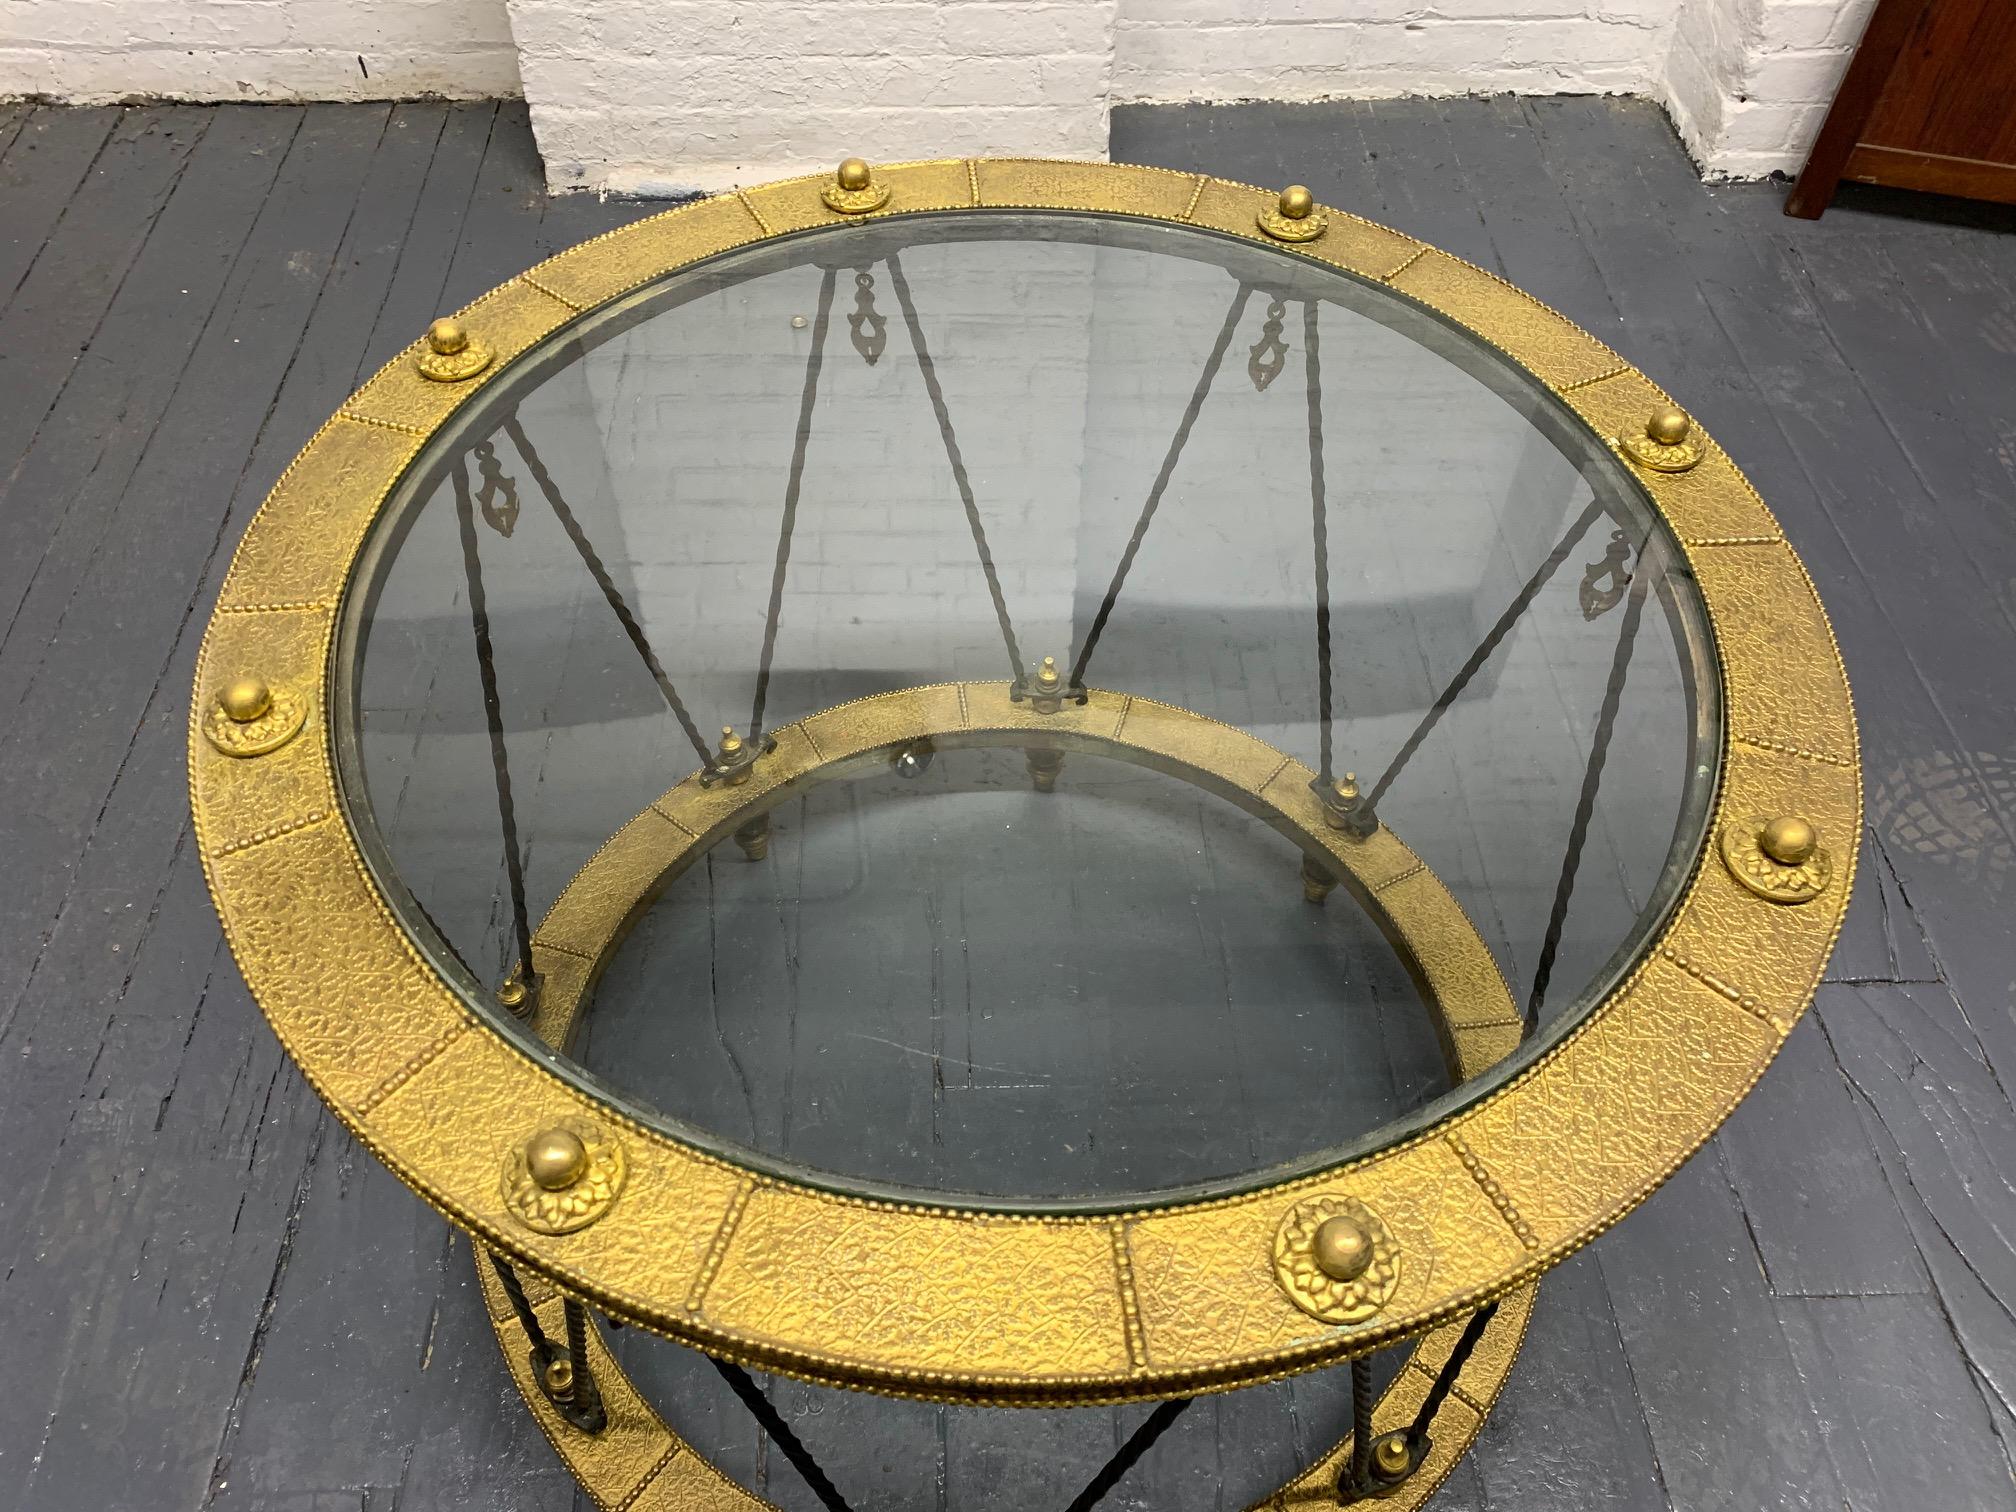 French wrought iron and brass side table. Very decorative and unique brass side table with dangling tassels, and a twisted wrought iron frame.